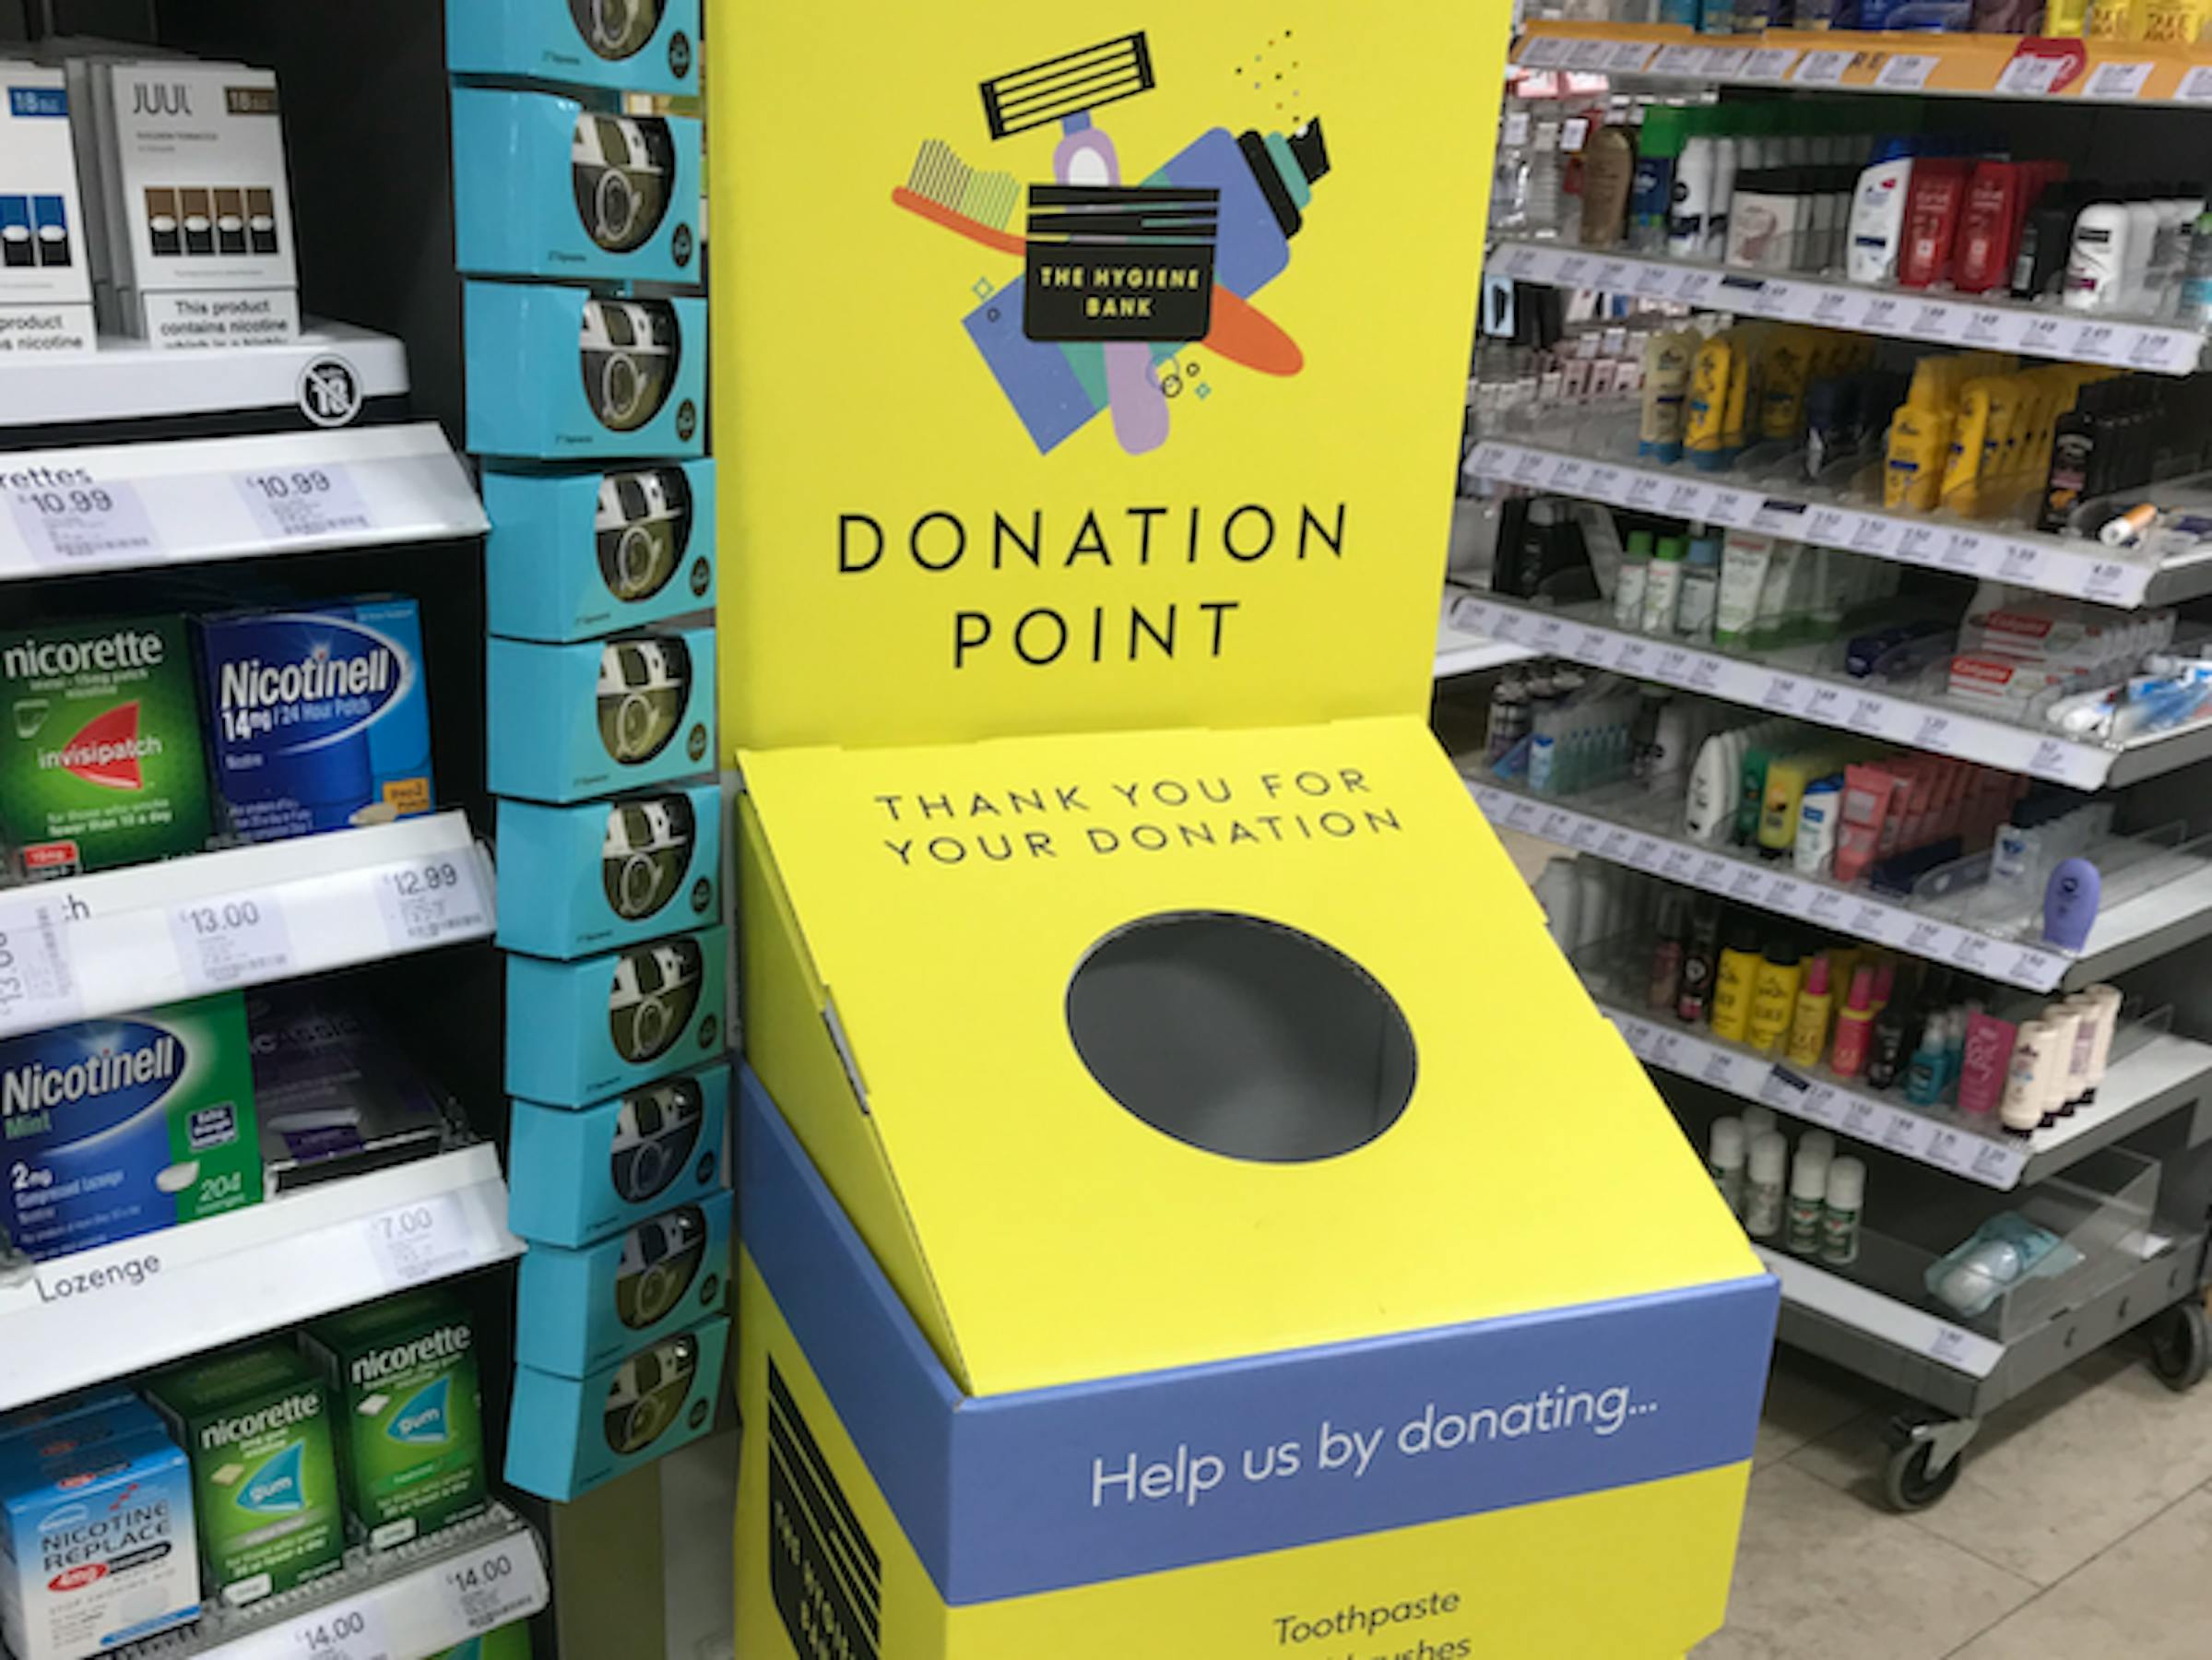 Hygiene Banks in Lambeth: how to donate